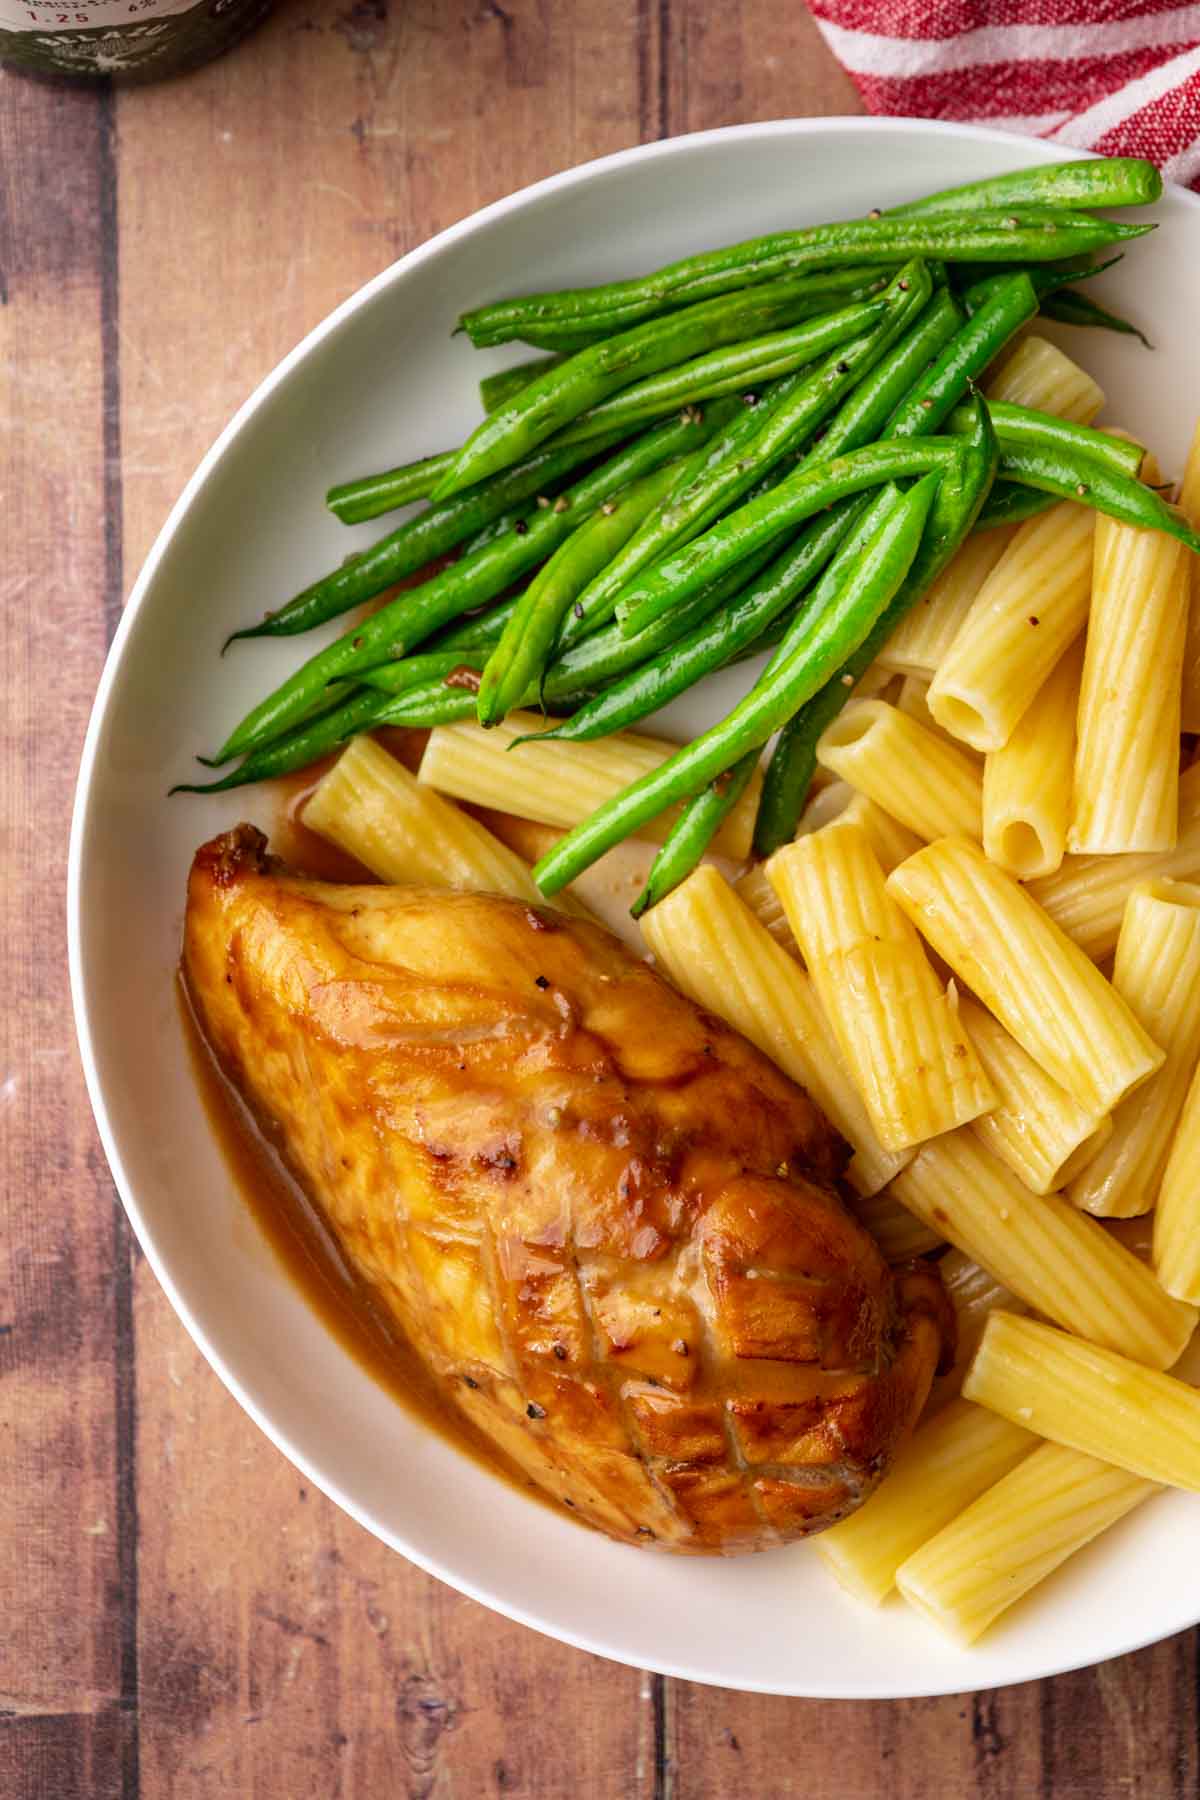 Balsamic Chicken baked chicken breast on plate with asparagus and pasta